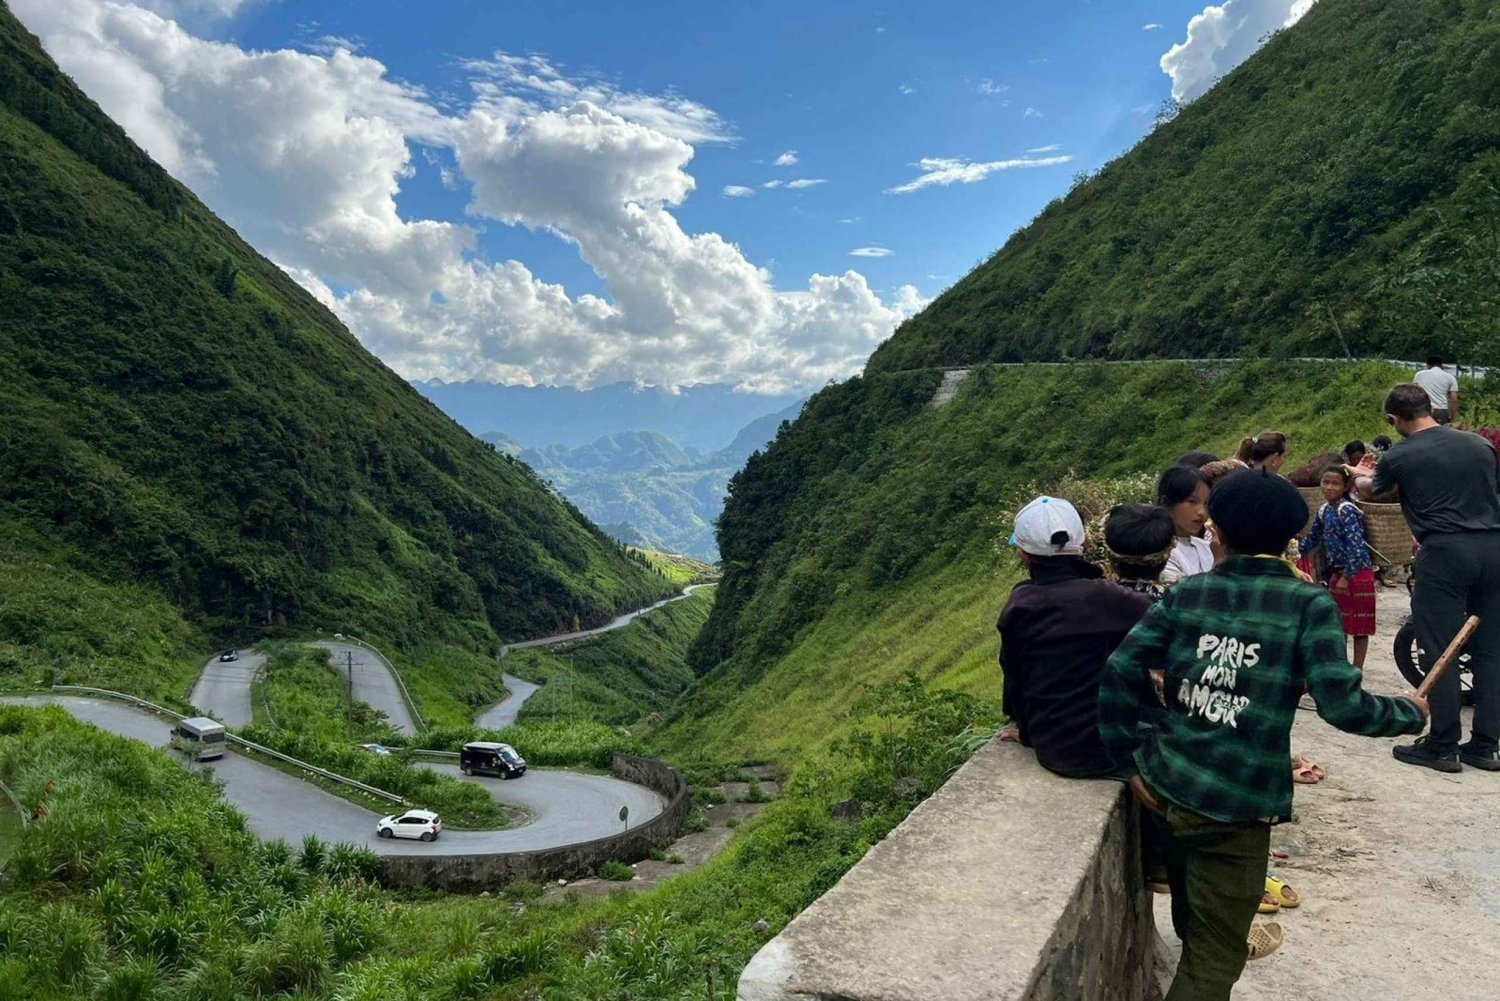 Ha Giang Motorbike Loop Tour – The Highlights in 3 Days